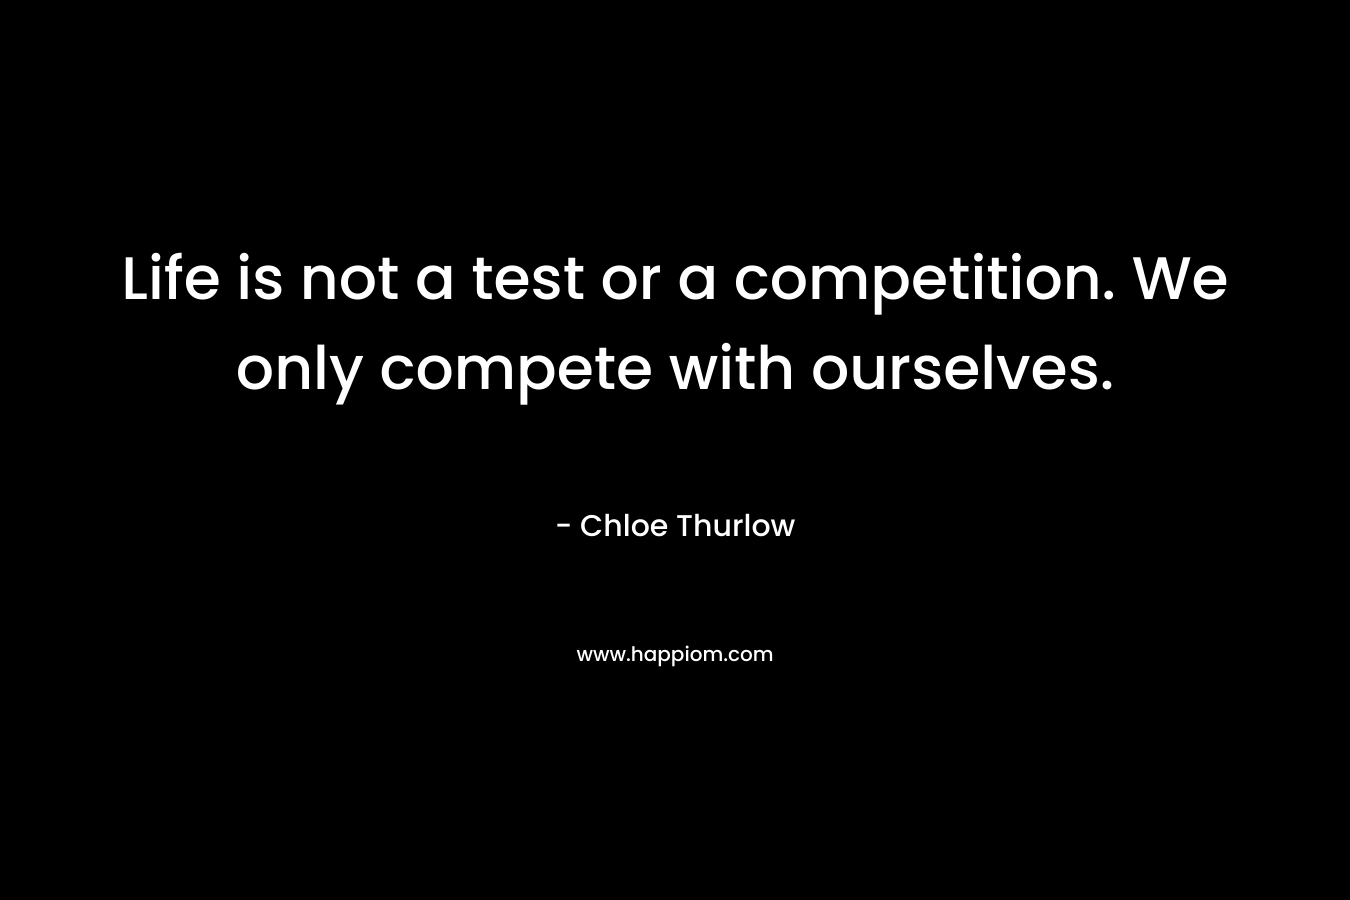 Life is not a test or a competition. We only compete with ourselves. – Chloe Thurlow